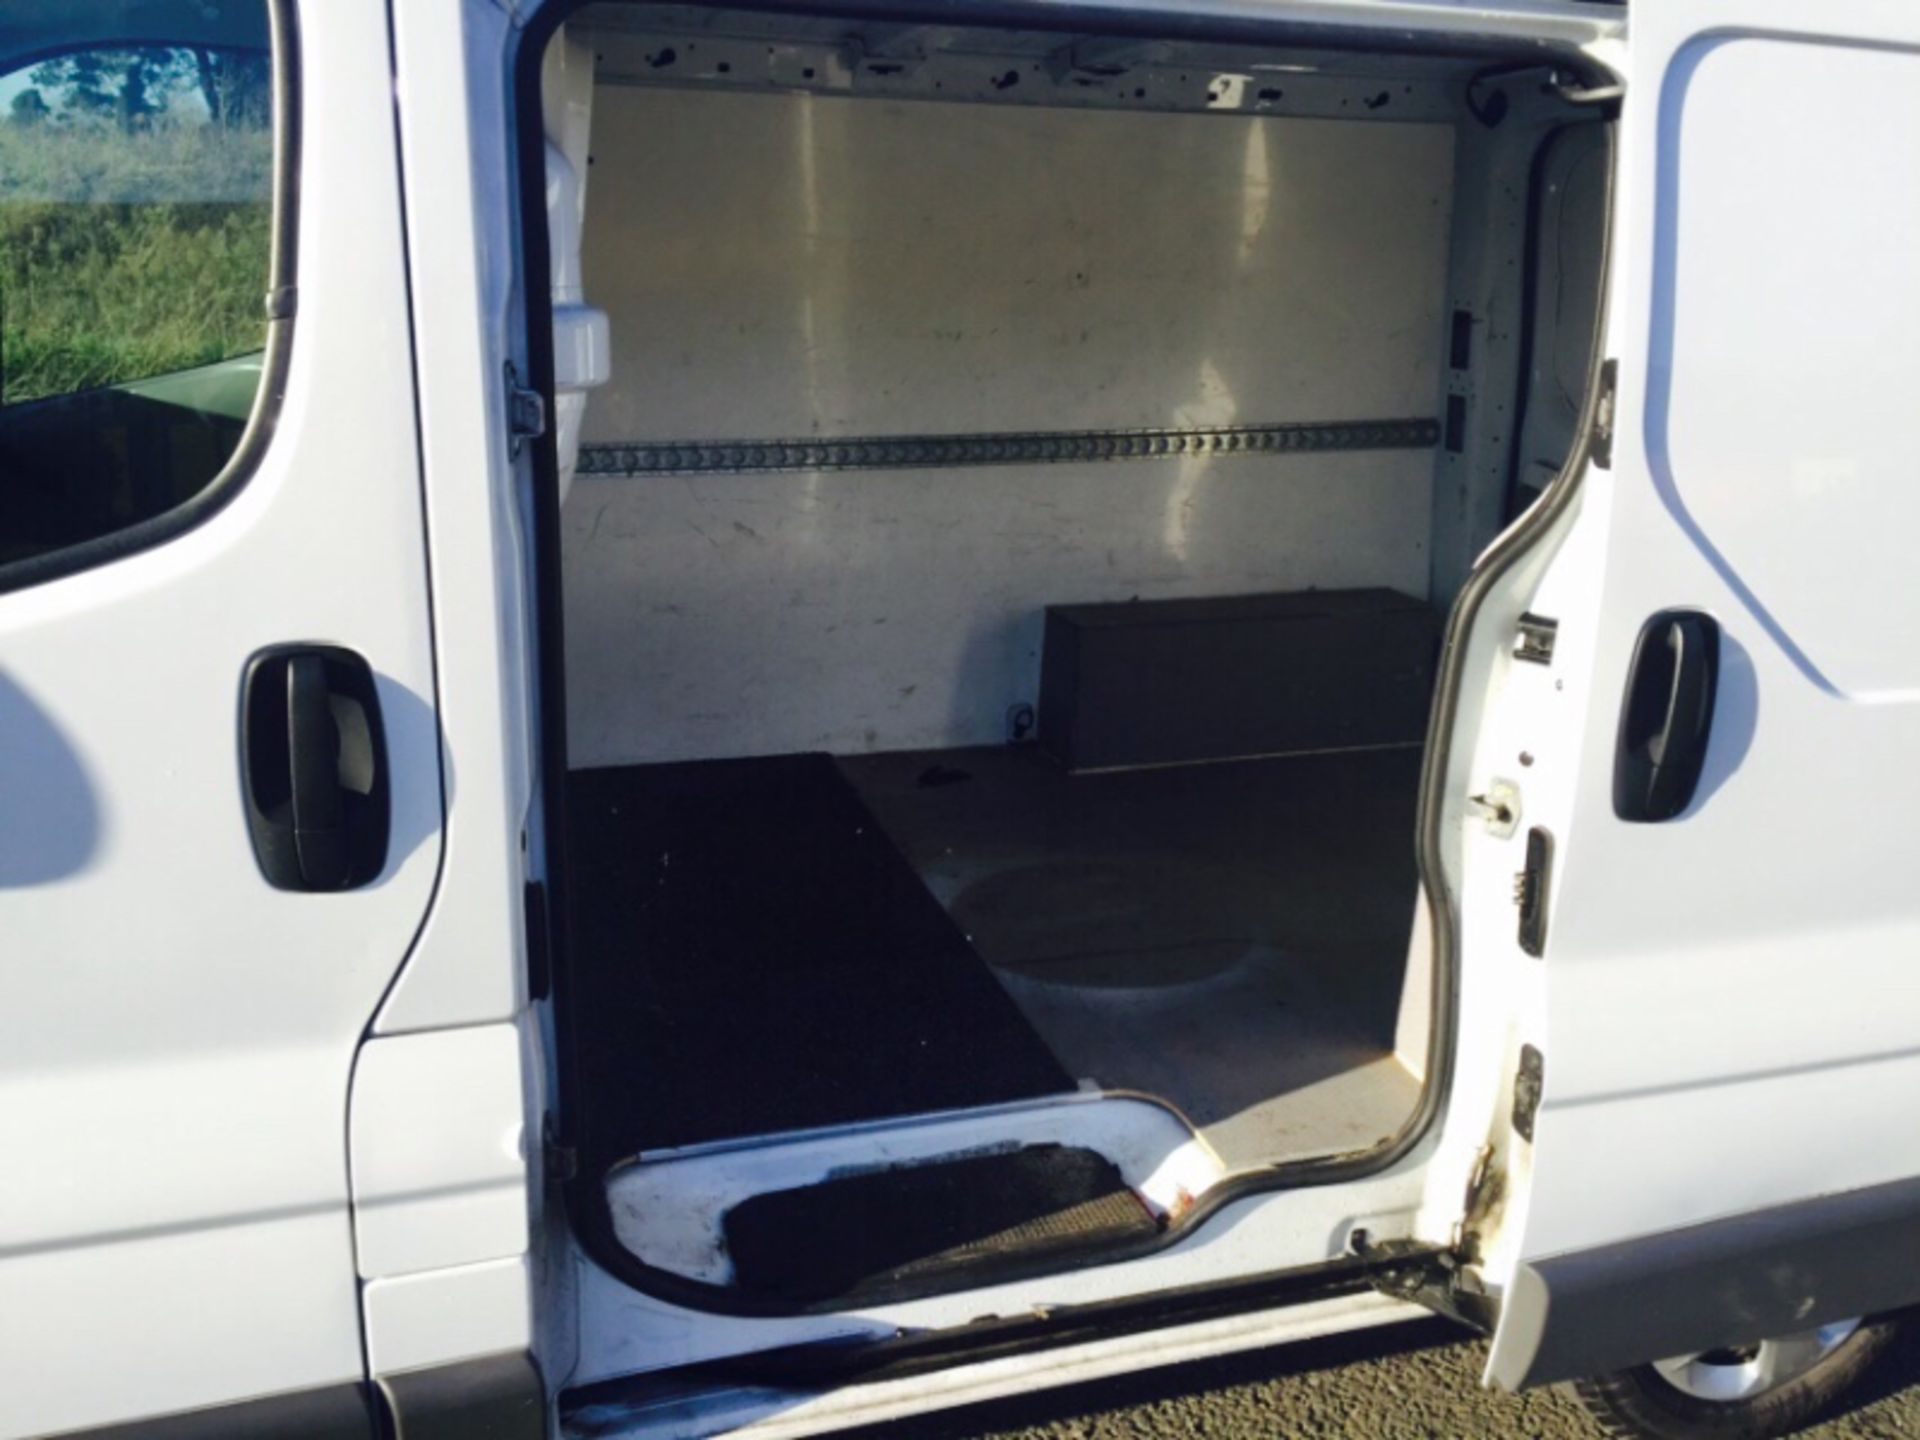 VAUXHALL VIVARO 2.0CDTI - 2012 MODEL - ELECTRIC PACK - 1 OWNER FROM NEW - FULL SERVICE HISTORY!!!! - Image 8 of 9